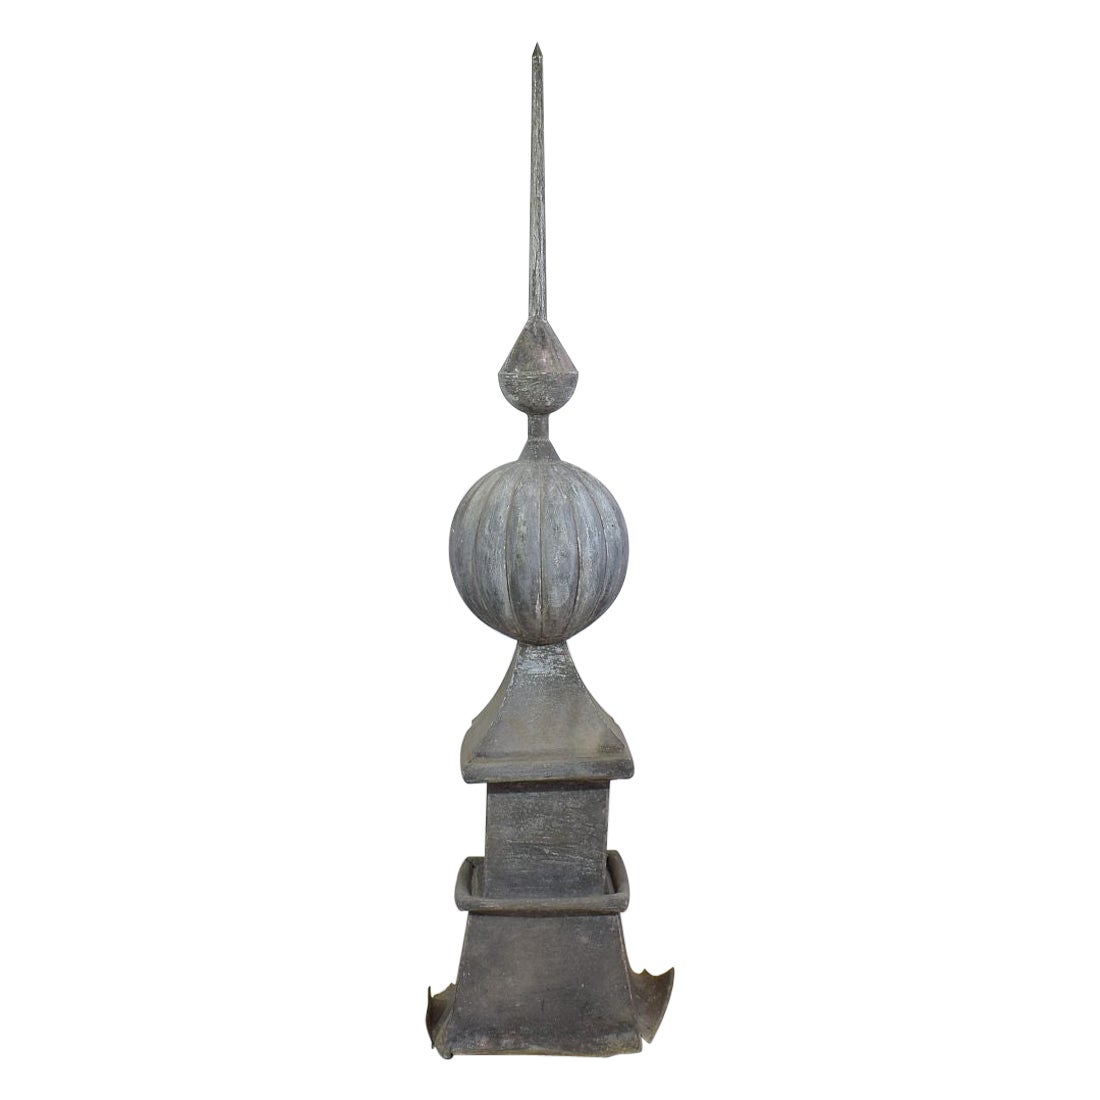 Large 19th Century French Zinc Roof Finial / Spire